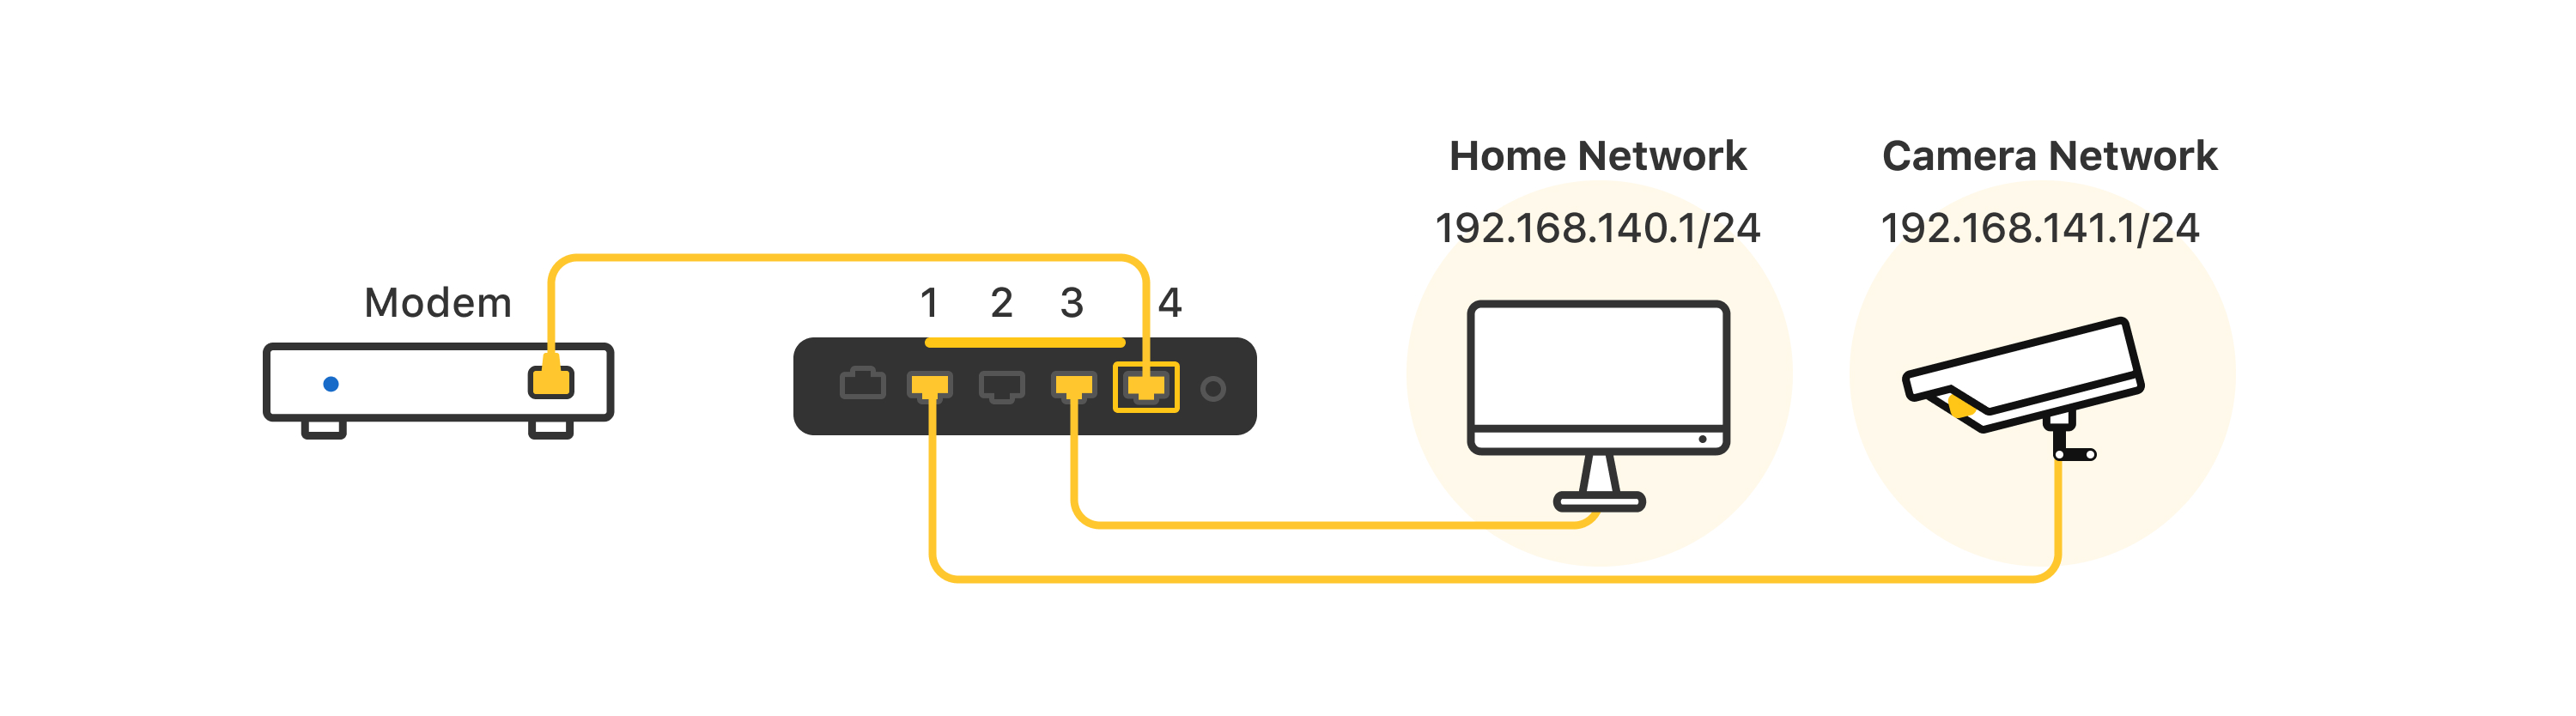 Port-Based Segmentation (Gold Only) - Example 1: A Single Ethernet Device